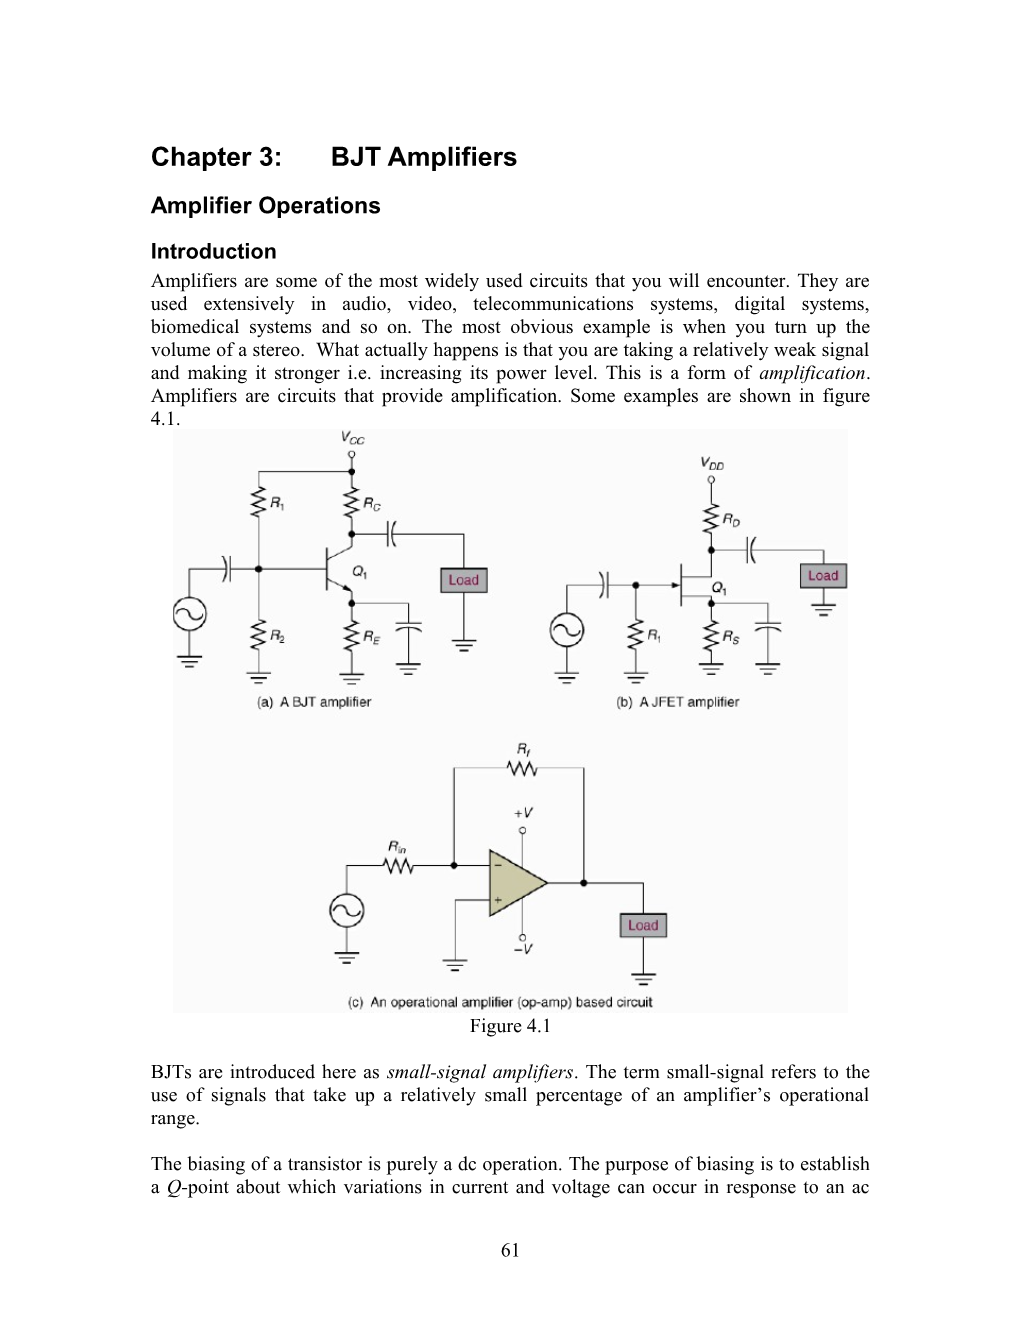 Chapter 3:BJT Amplifiers